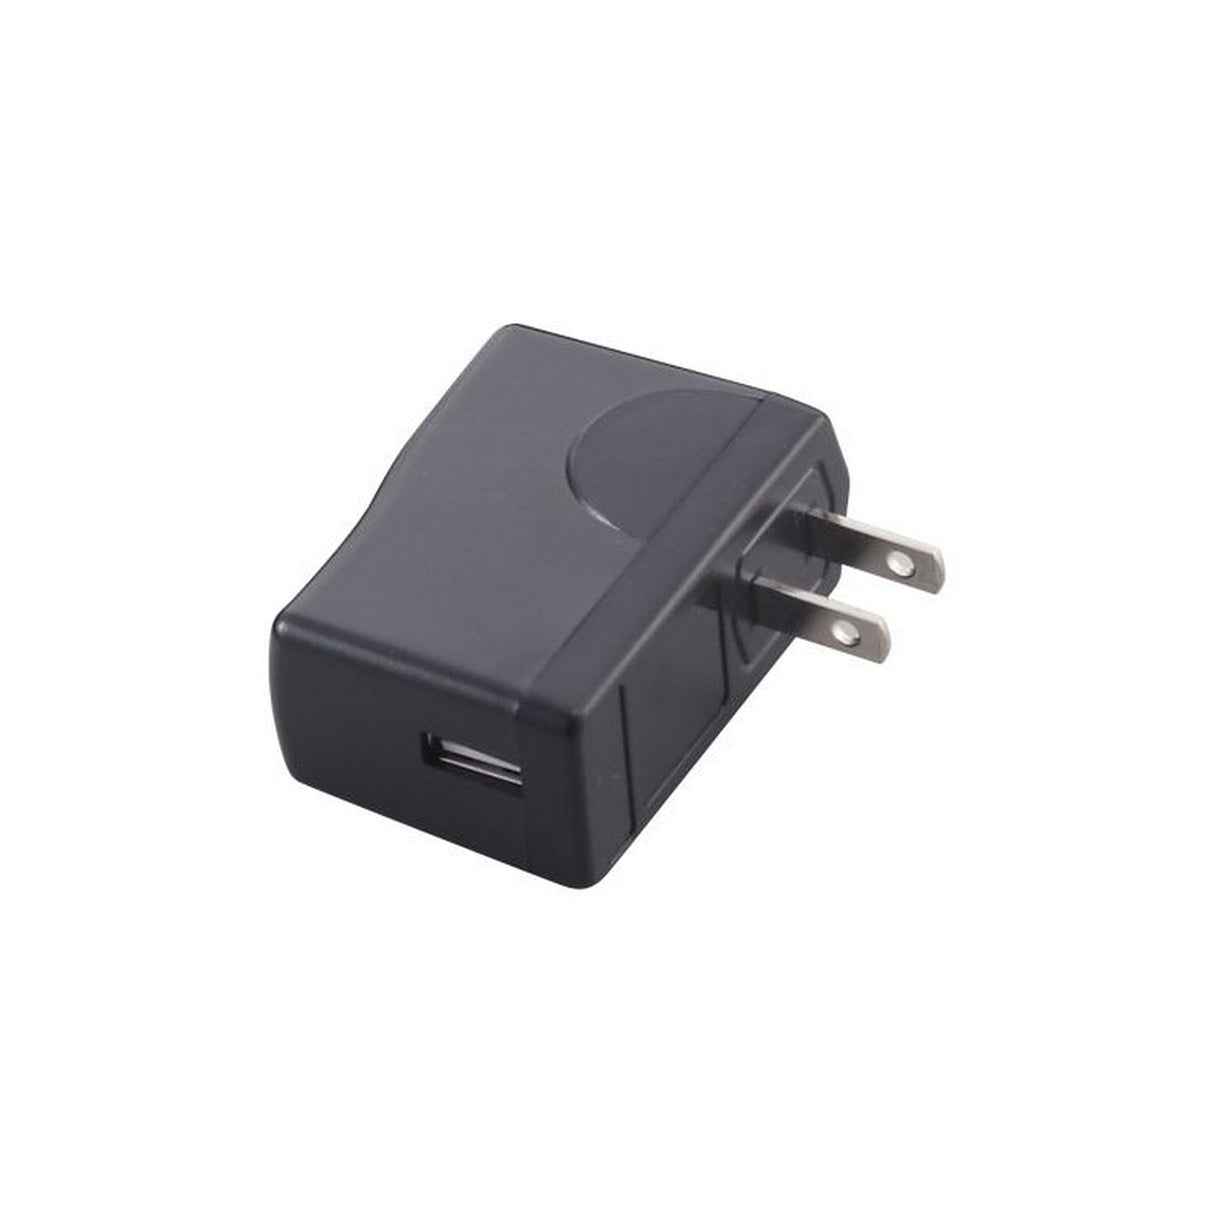 Zoom AD-17 | DC5V USB Power Adapter Designed for H1 H2n H5 H6 R8 Q2HD Q4 Q8